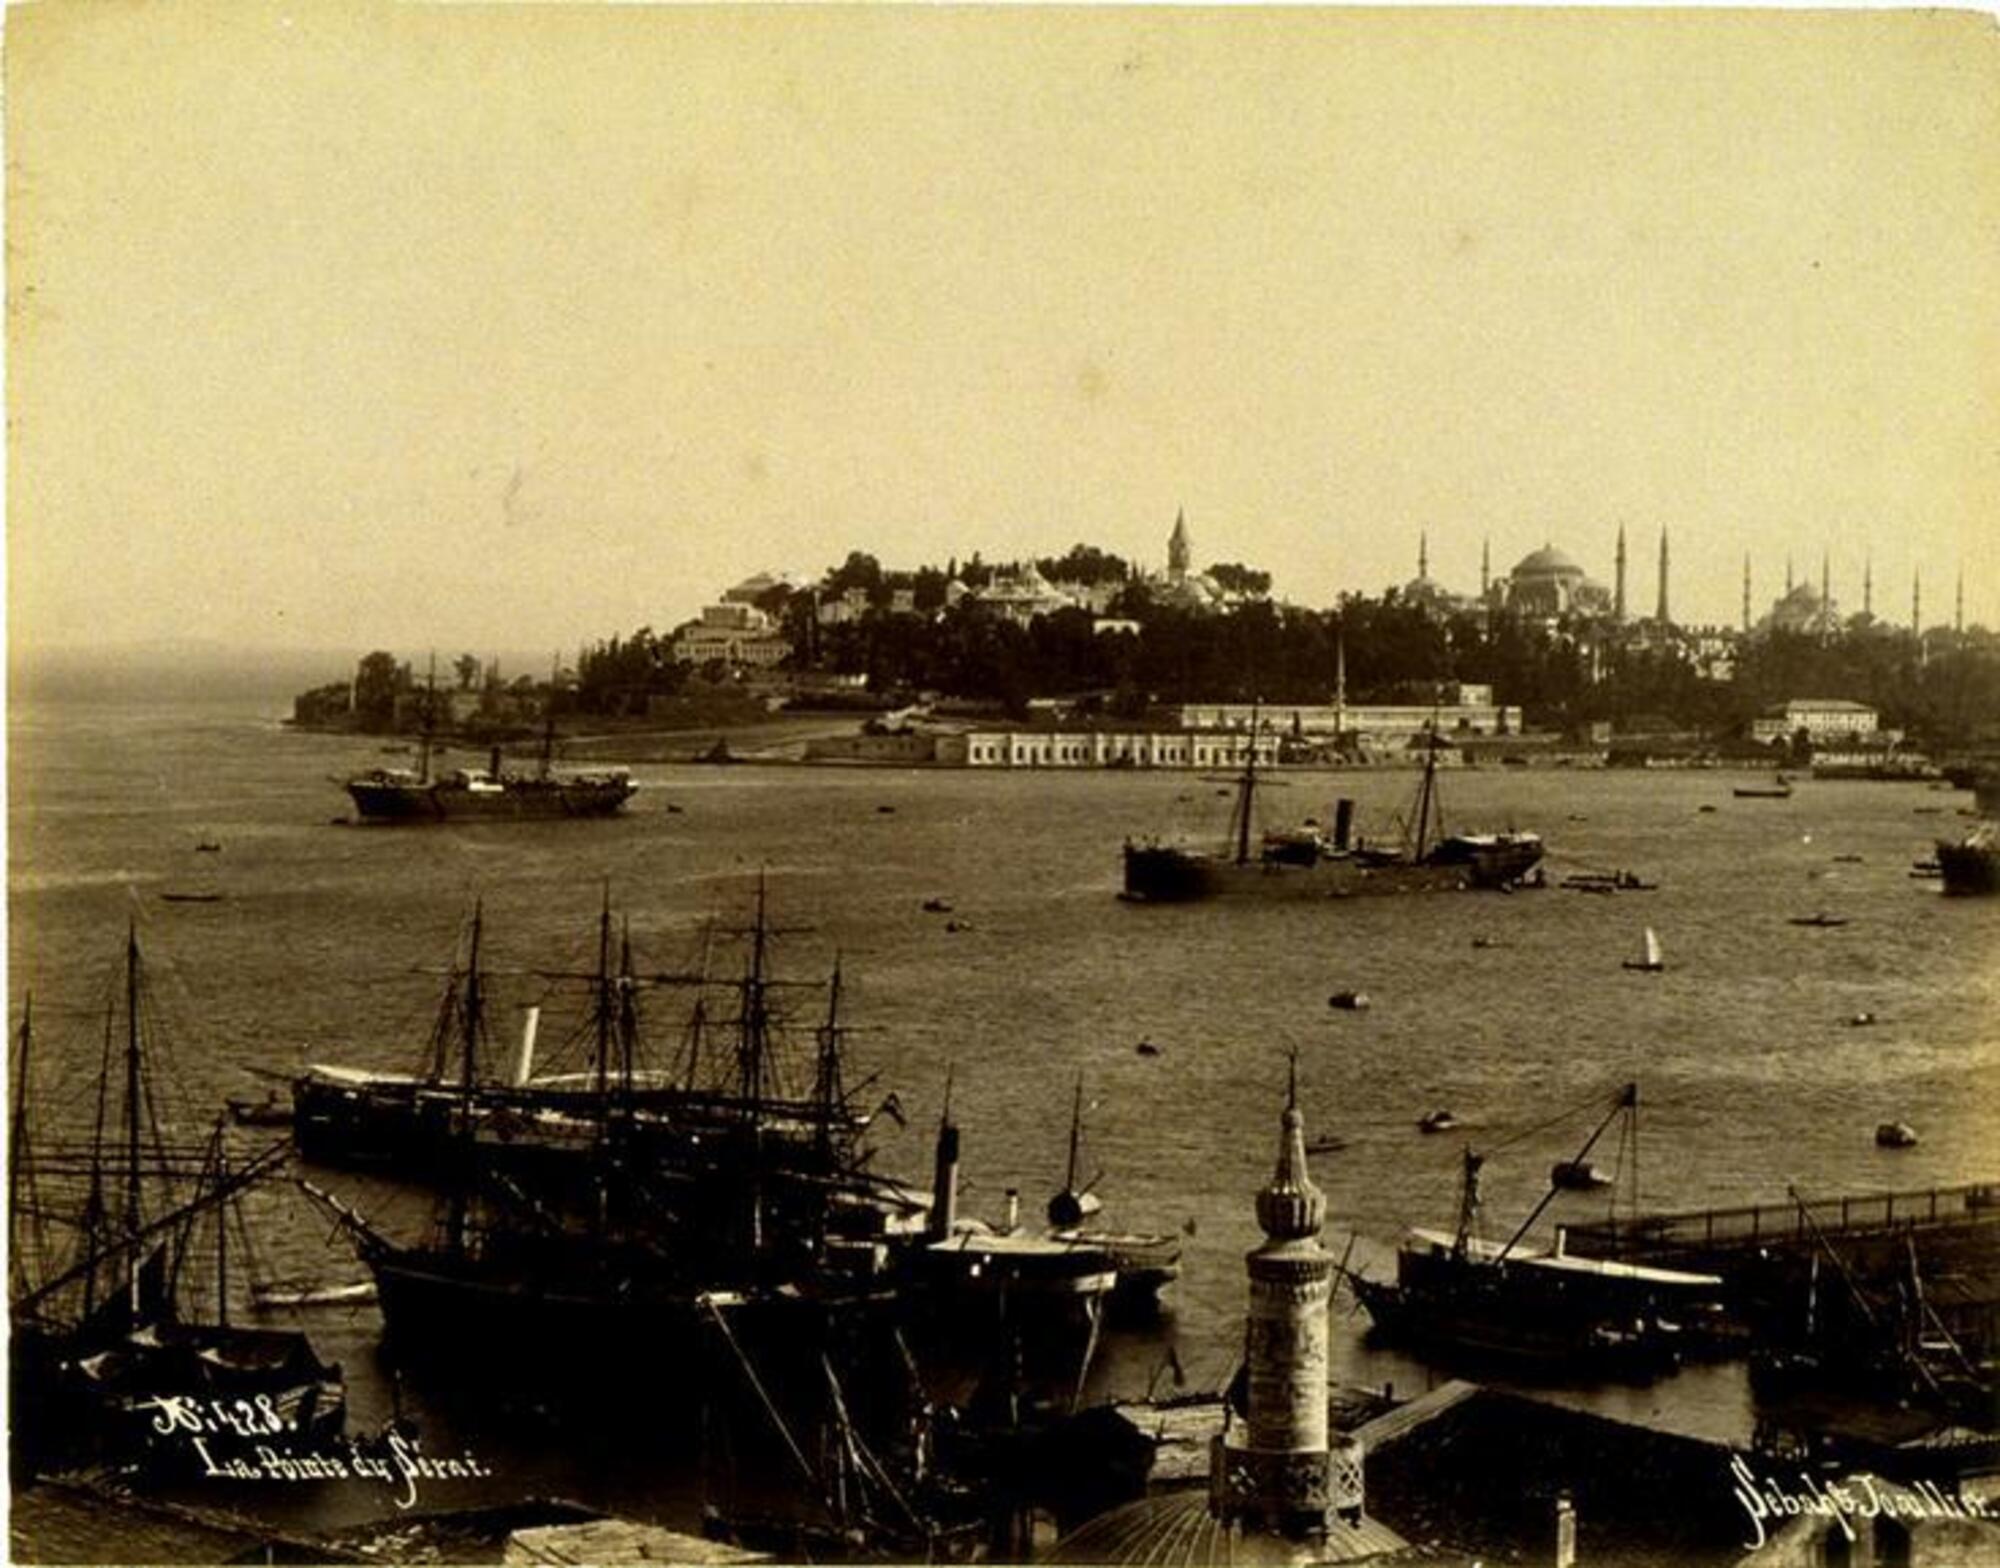 View down onto a busy seaport populated by numerous steamships and smaller watercraft. A sliver of land with various towers and domed structures stretches across the horizon line in the distance. 